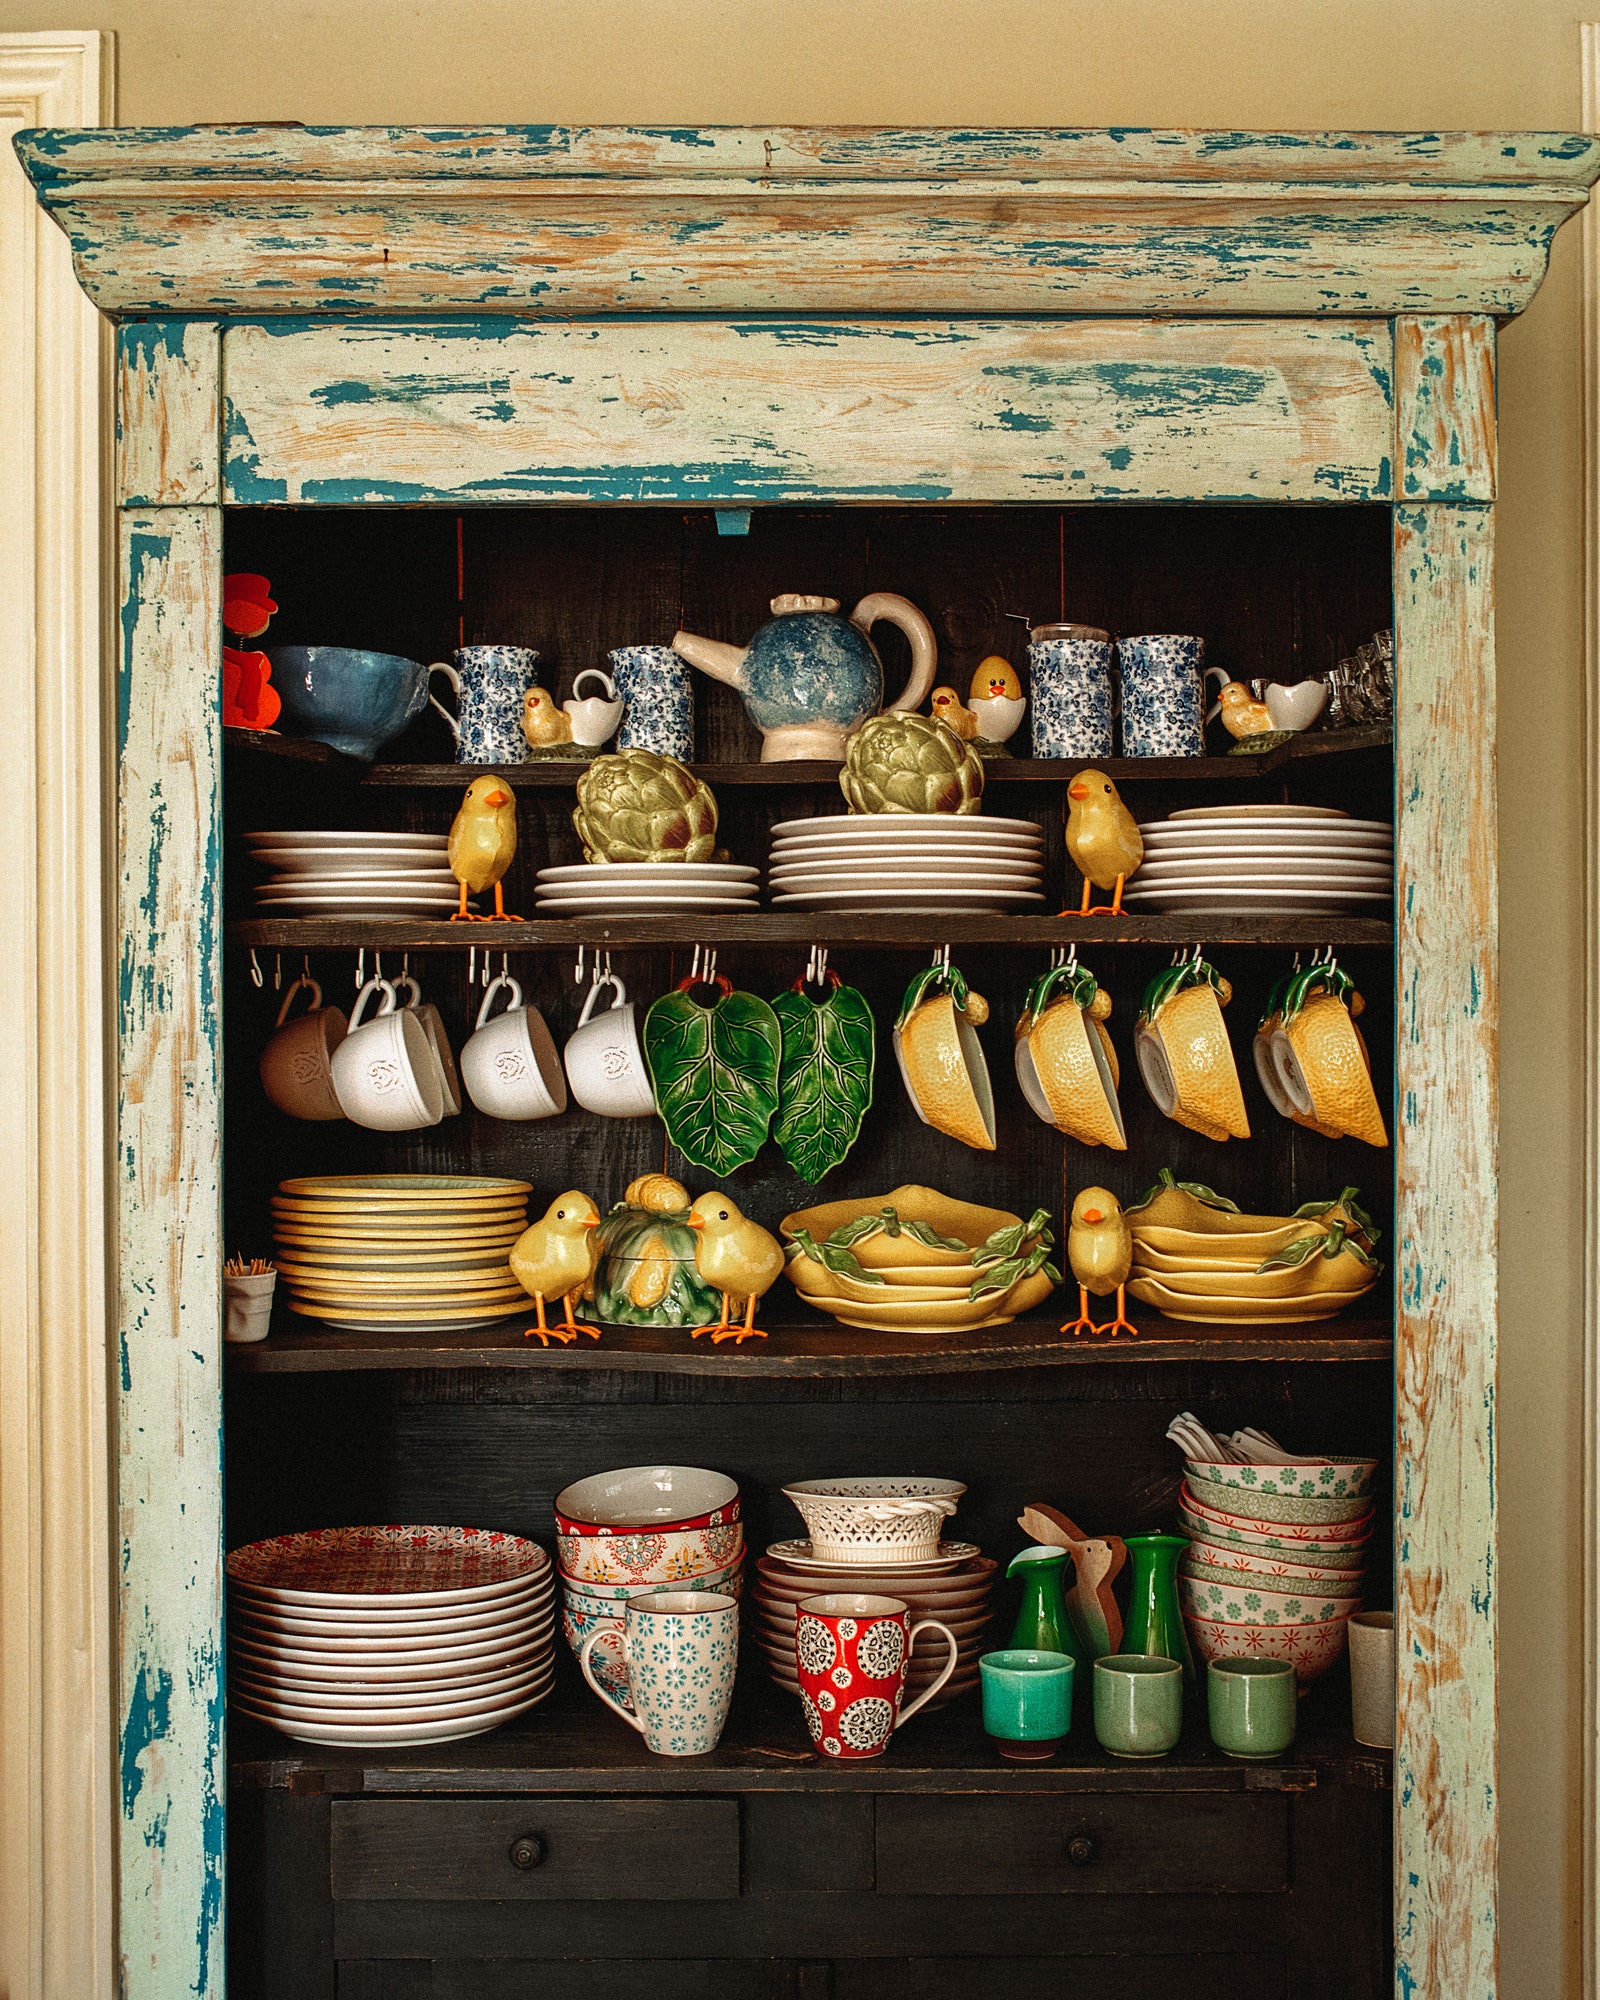 A kitchen cupboard at the home of Cordelia de Castellane holds a collection of colorful dishes.